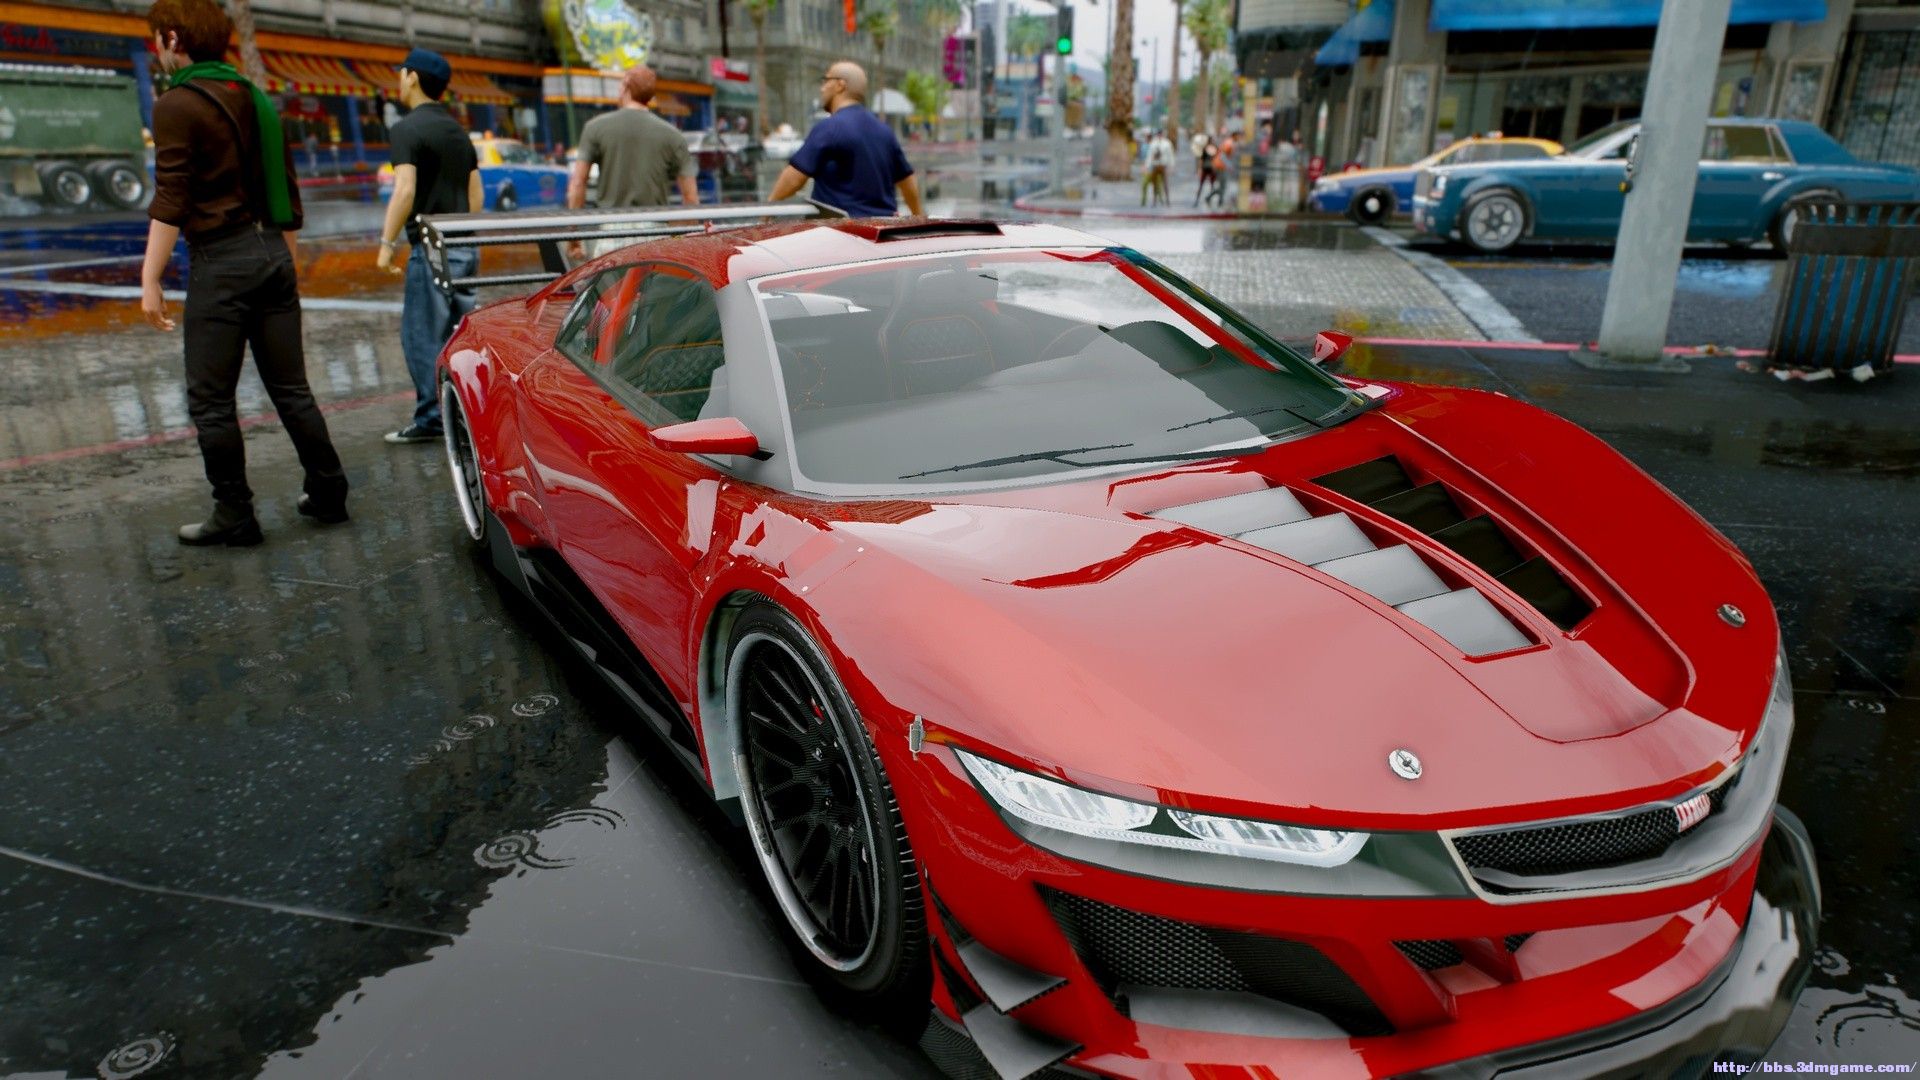 GRAND THEFT AUTO V TO HAVE CUSTOMISABLE CARS AND WEAPONS